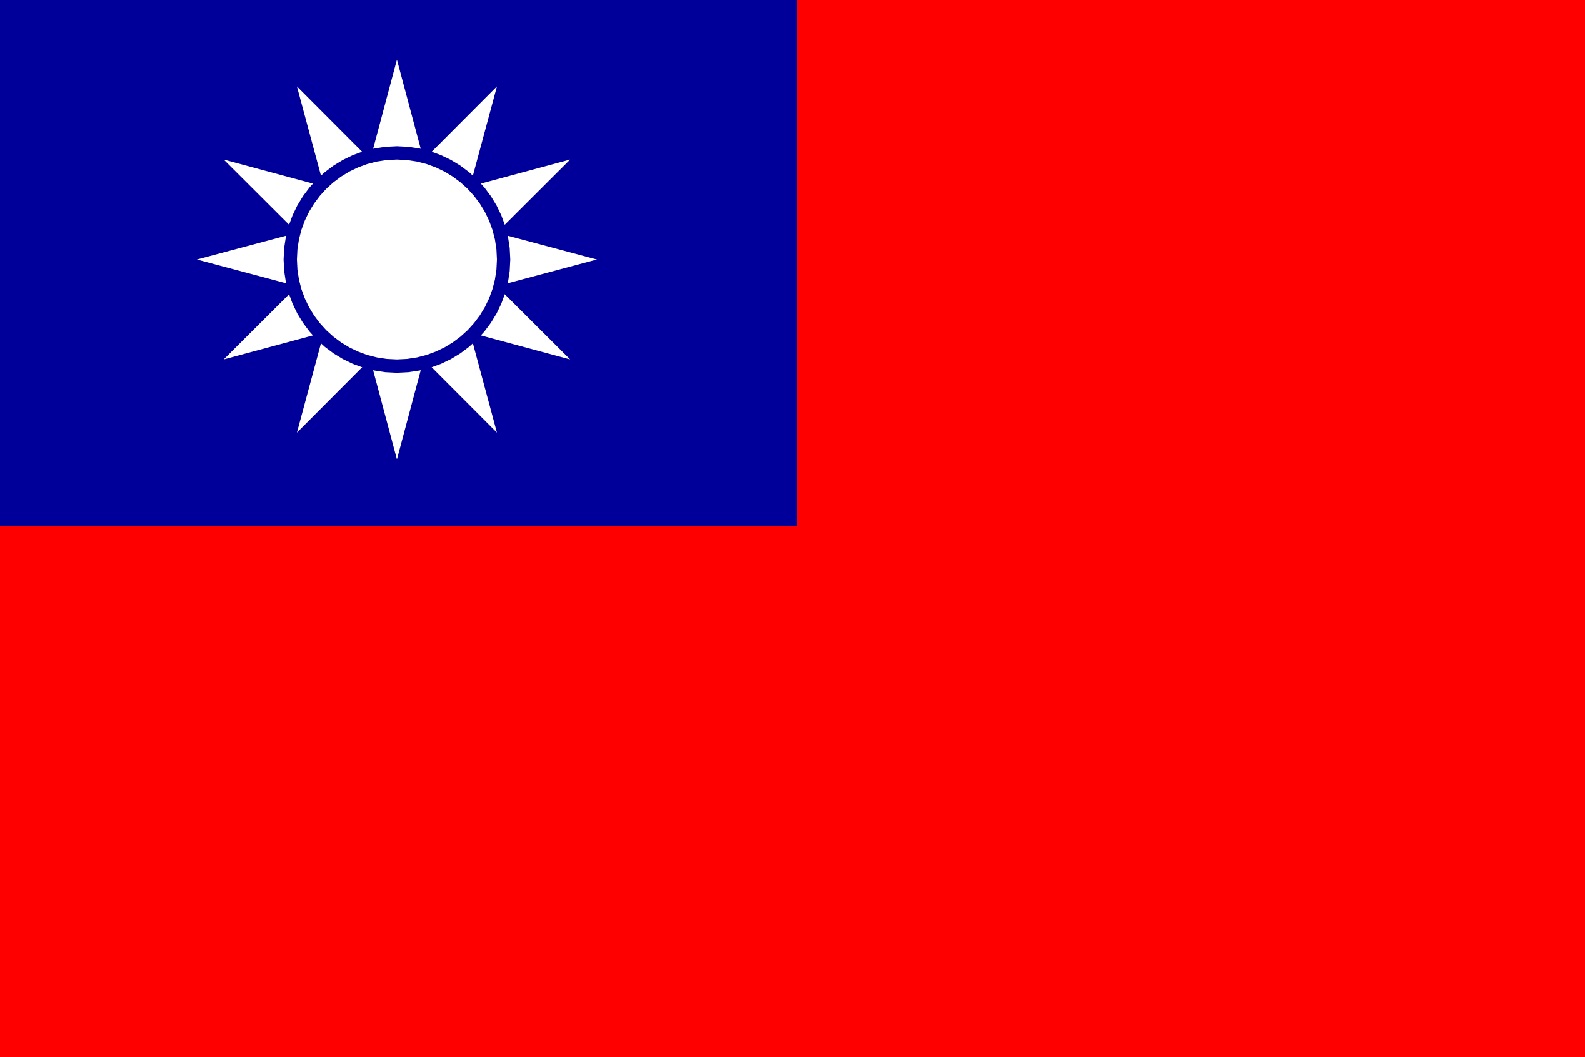 Good call, Trump: It’s time America recognized Taiwan as a sovereign nation (and rejected the bullying of communist China)